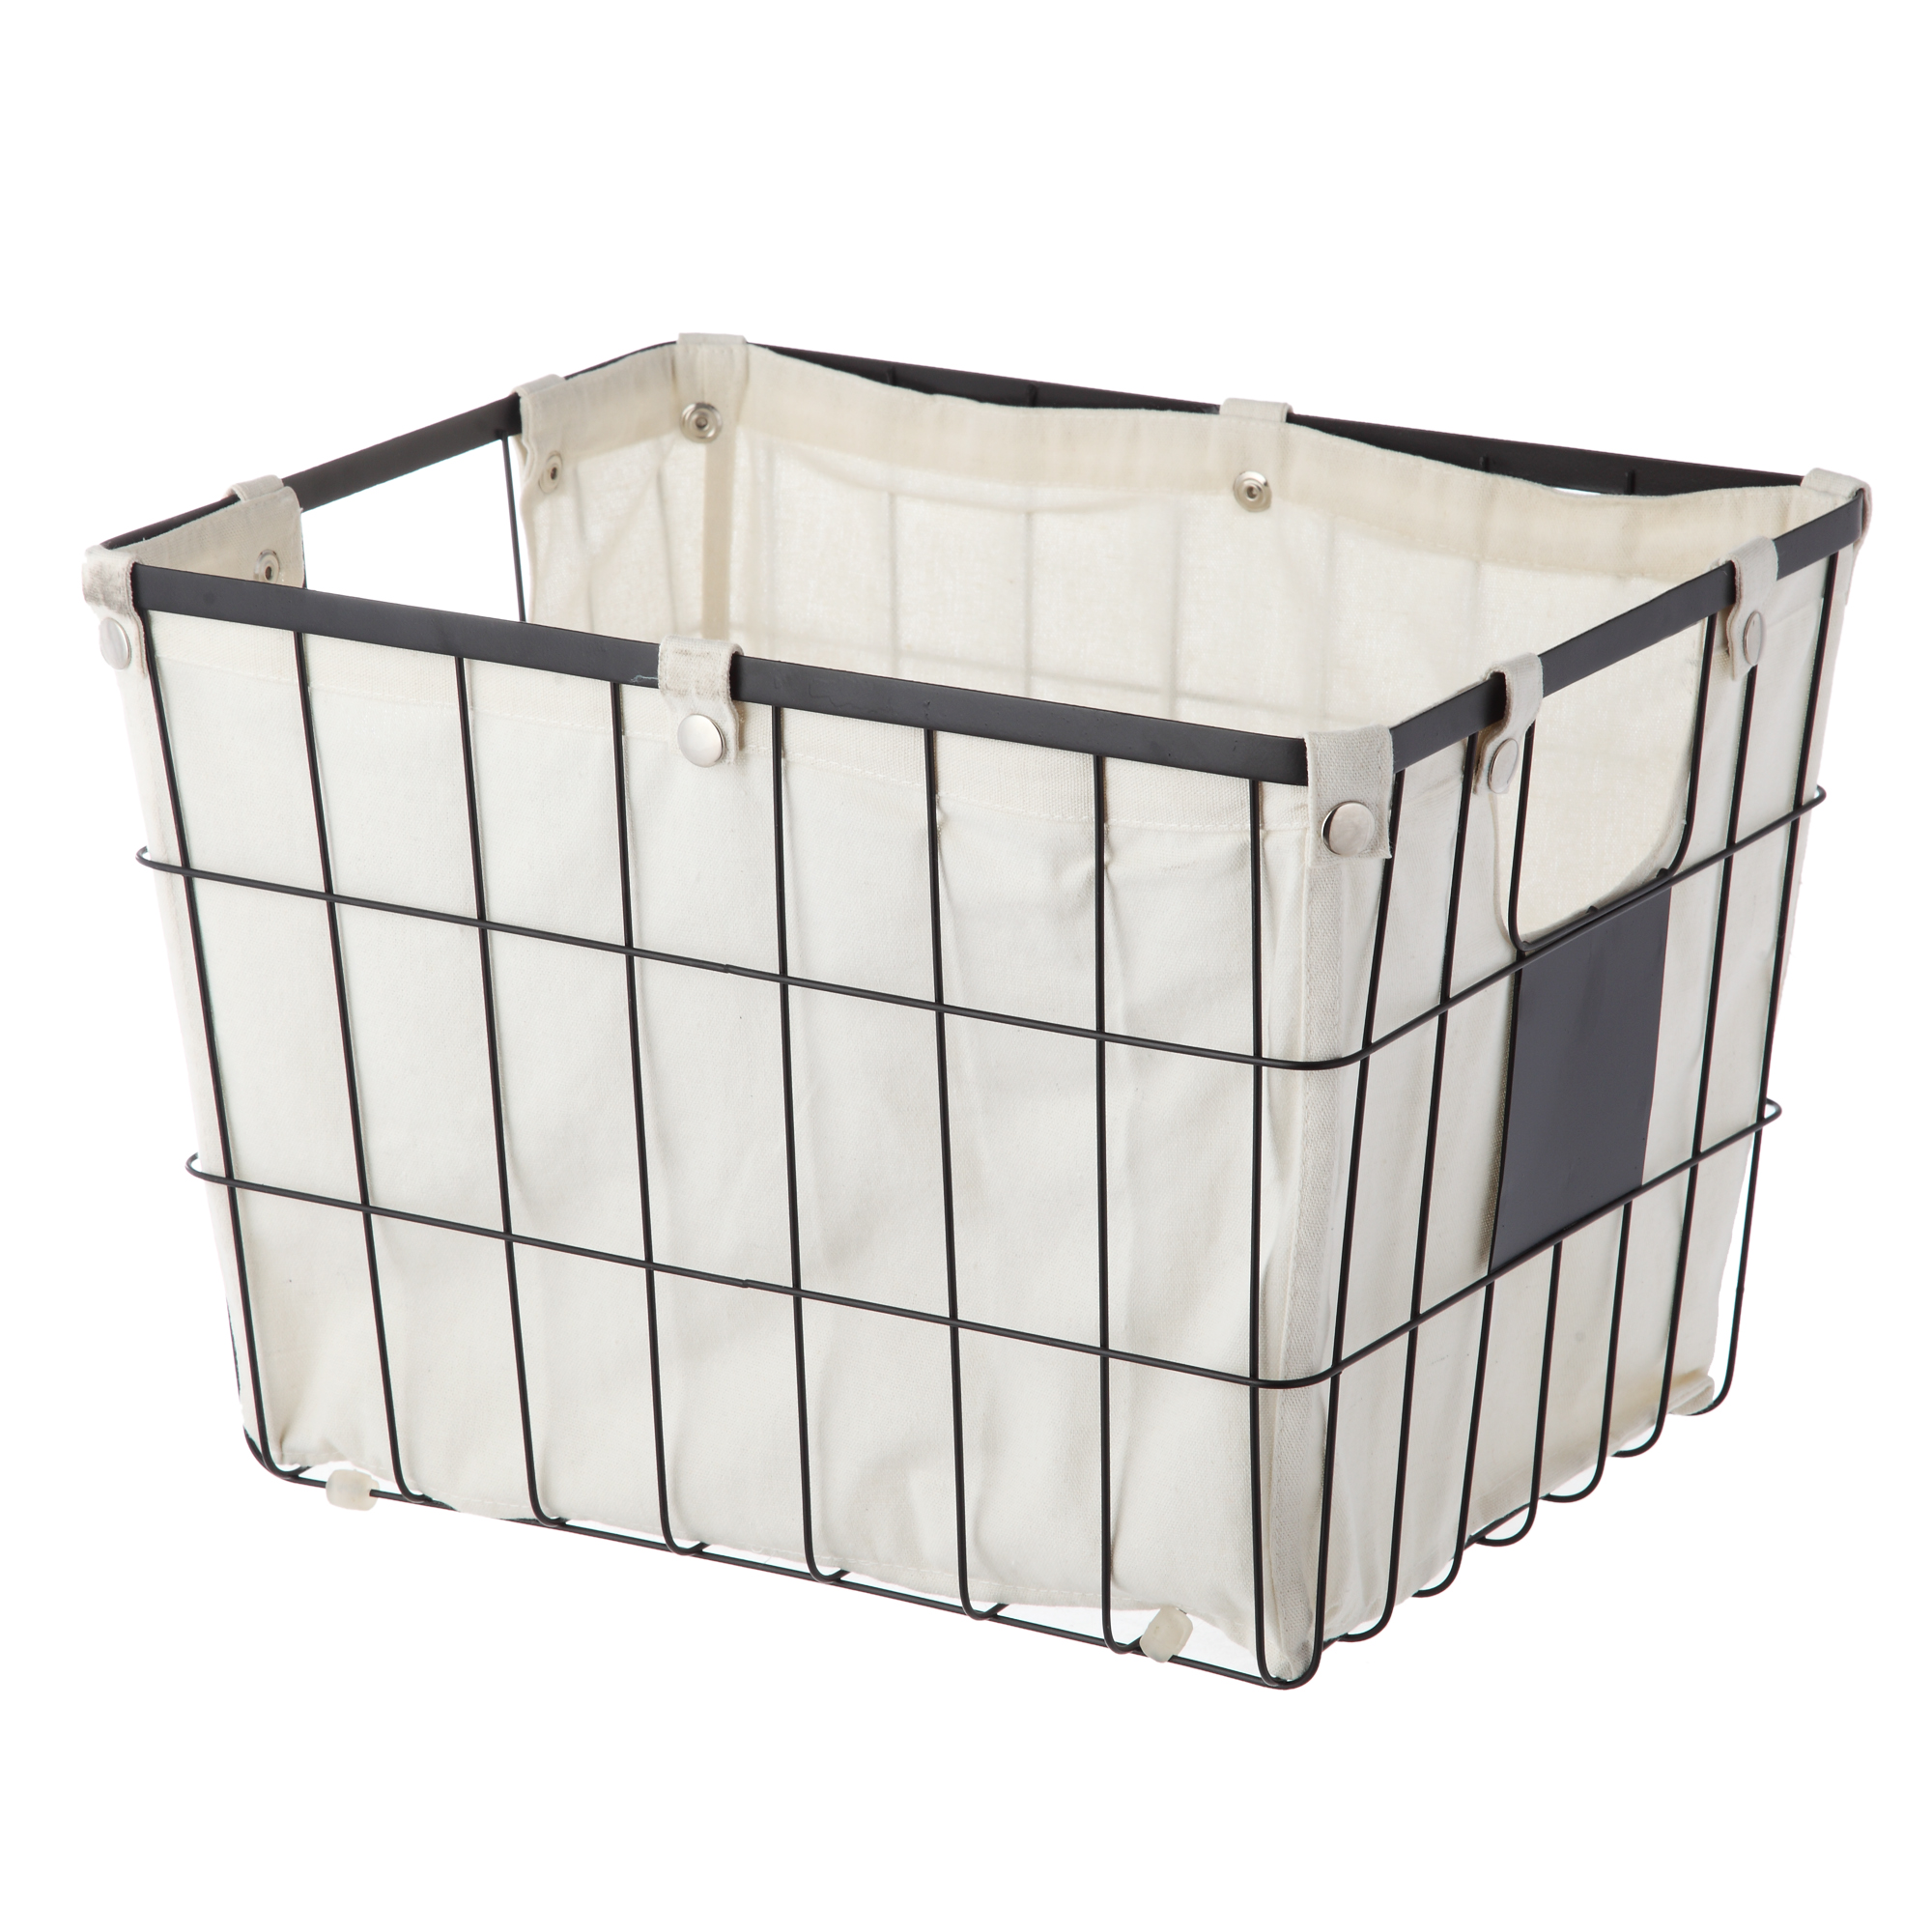 Better Homes and Gardens Medium Wire Basket with Chalkboard, Black - image 4 of 6